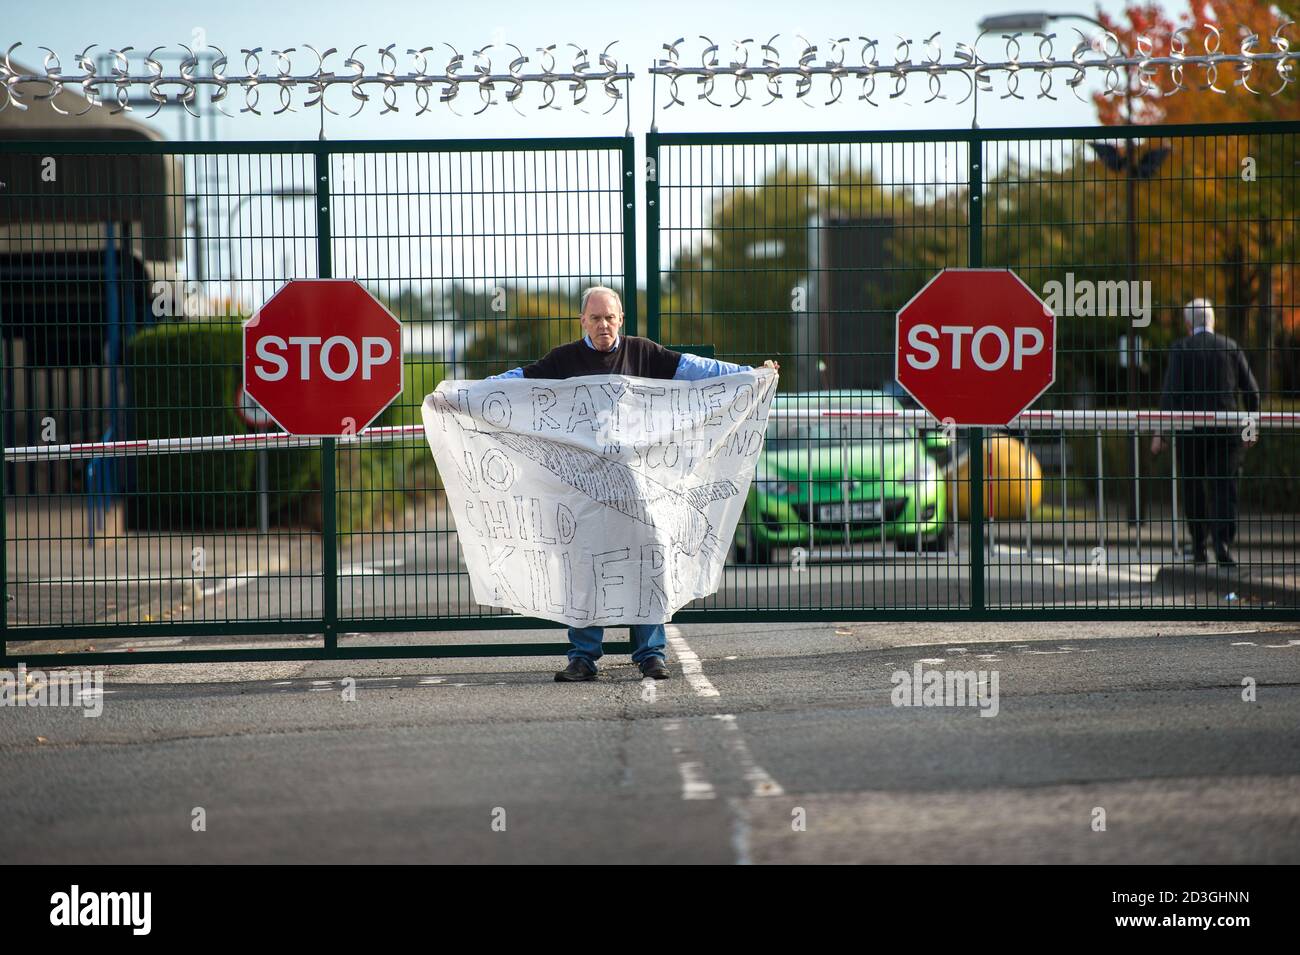 Glenrothes, Scotland, UK. 8 October 2020. Pictured: Sean Clerkin of Action For Scotland.  Credit: Colin Fisher/Alamy Live News. Stock Photo